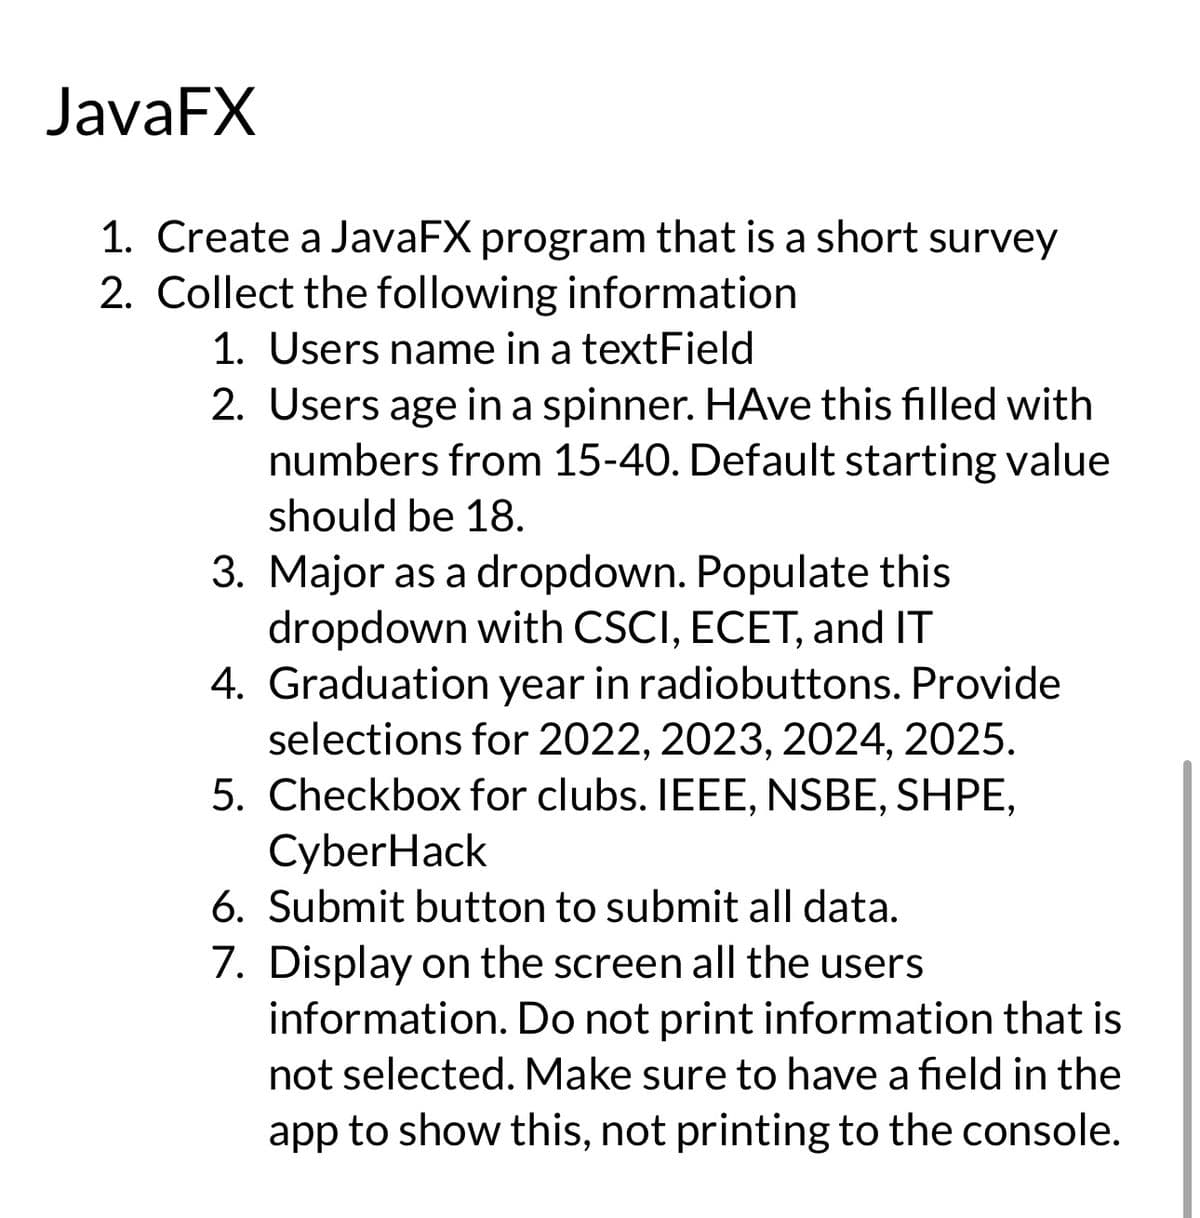 JavaFX
1. Create a JavaFX program that is a short survey
2. Collect the following information
1. Users name in a textField
2. Users age in a spinner. HAve this filled with
numbers from 15-40. Default starting value
should be 18.
3. Major as a dropdown. Populate this
dropdown with CSCI, ECET, and IT
4. Graduation year in radiobuttons. Provide
selections for 2022, 2023, 2024, 2025.
5. Checkbox for clubs. IEEE, NSBE, SHPE,
CyberHack
6. Submit button to submit all data.
7. Display on the screen all the users
information. Do not print information that is
not selected. Make sure to have a field in the
app to show this, not printing to the console.